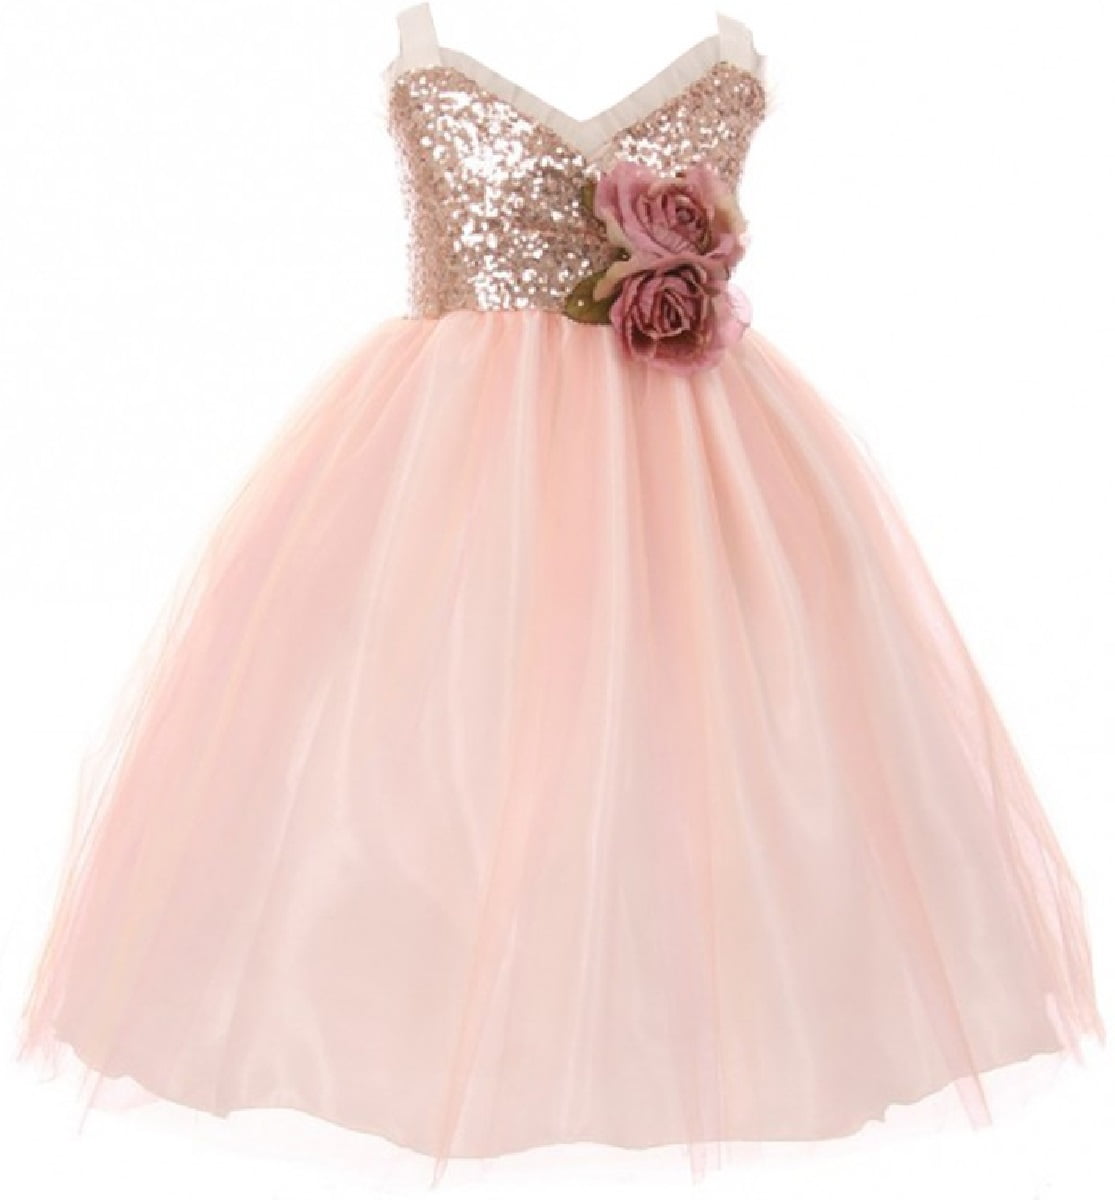 GIRLS LIGHT PINK SPARKLY SEQUIN TRIM SATIN TULLE PRINCESS PAGEANT PARTY DRESS 